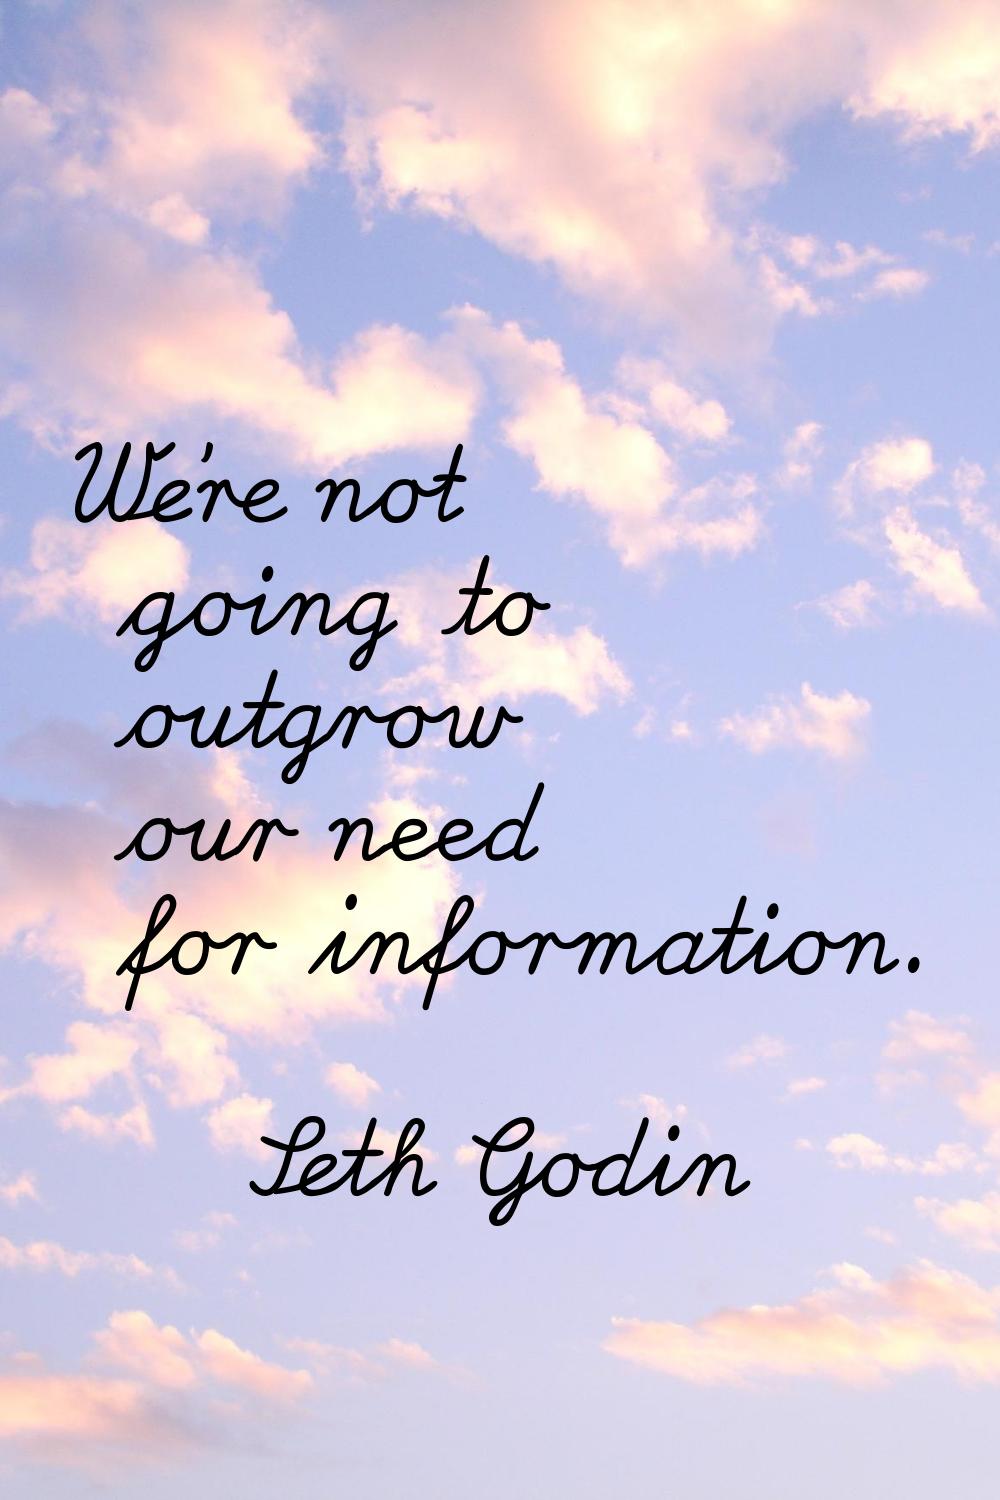 We're not going to outgrow our need for information.